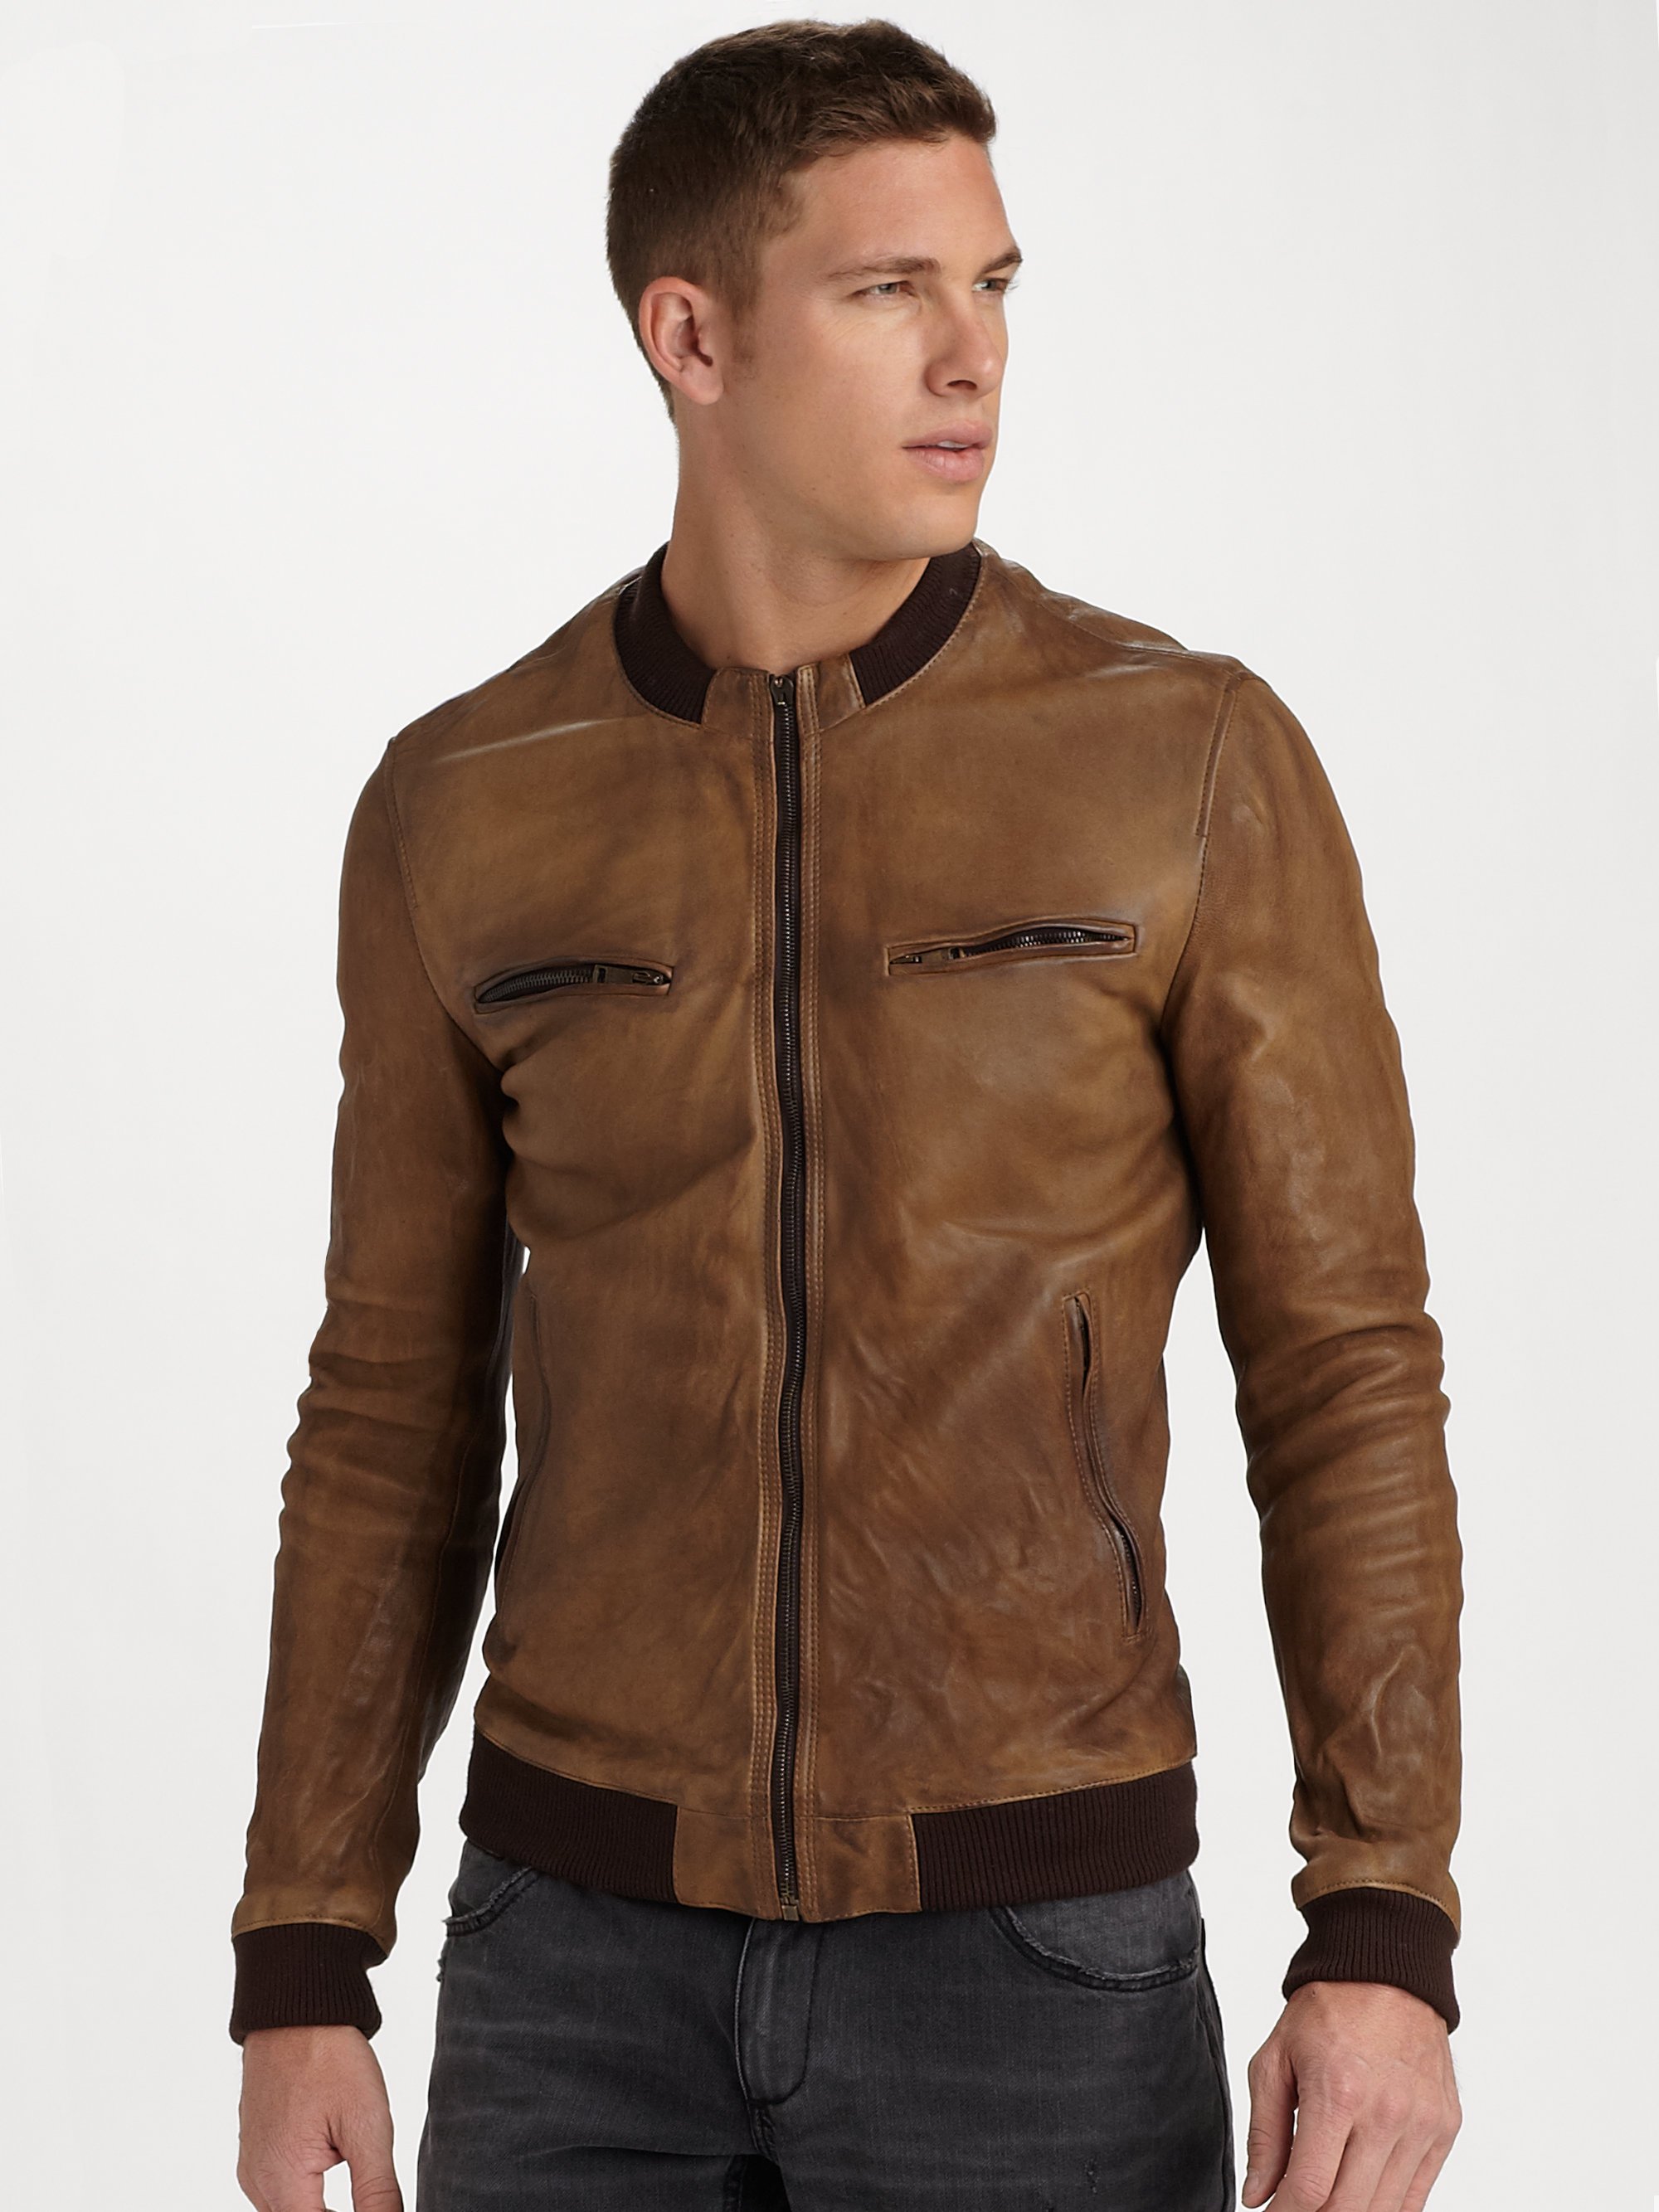 Lyst - Dolce & Gabbana Leather Jacket in Brown for Men